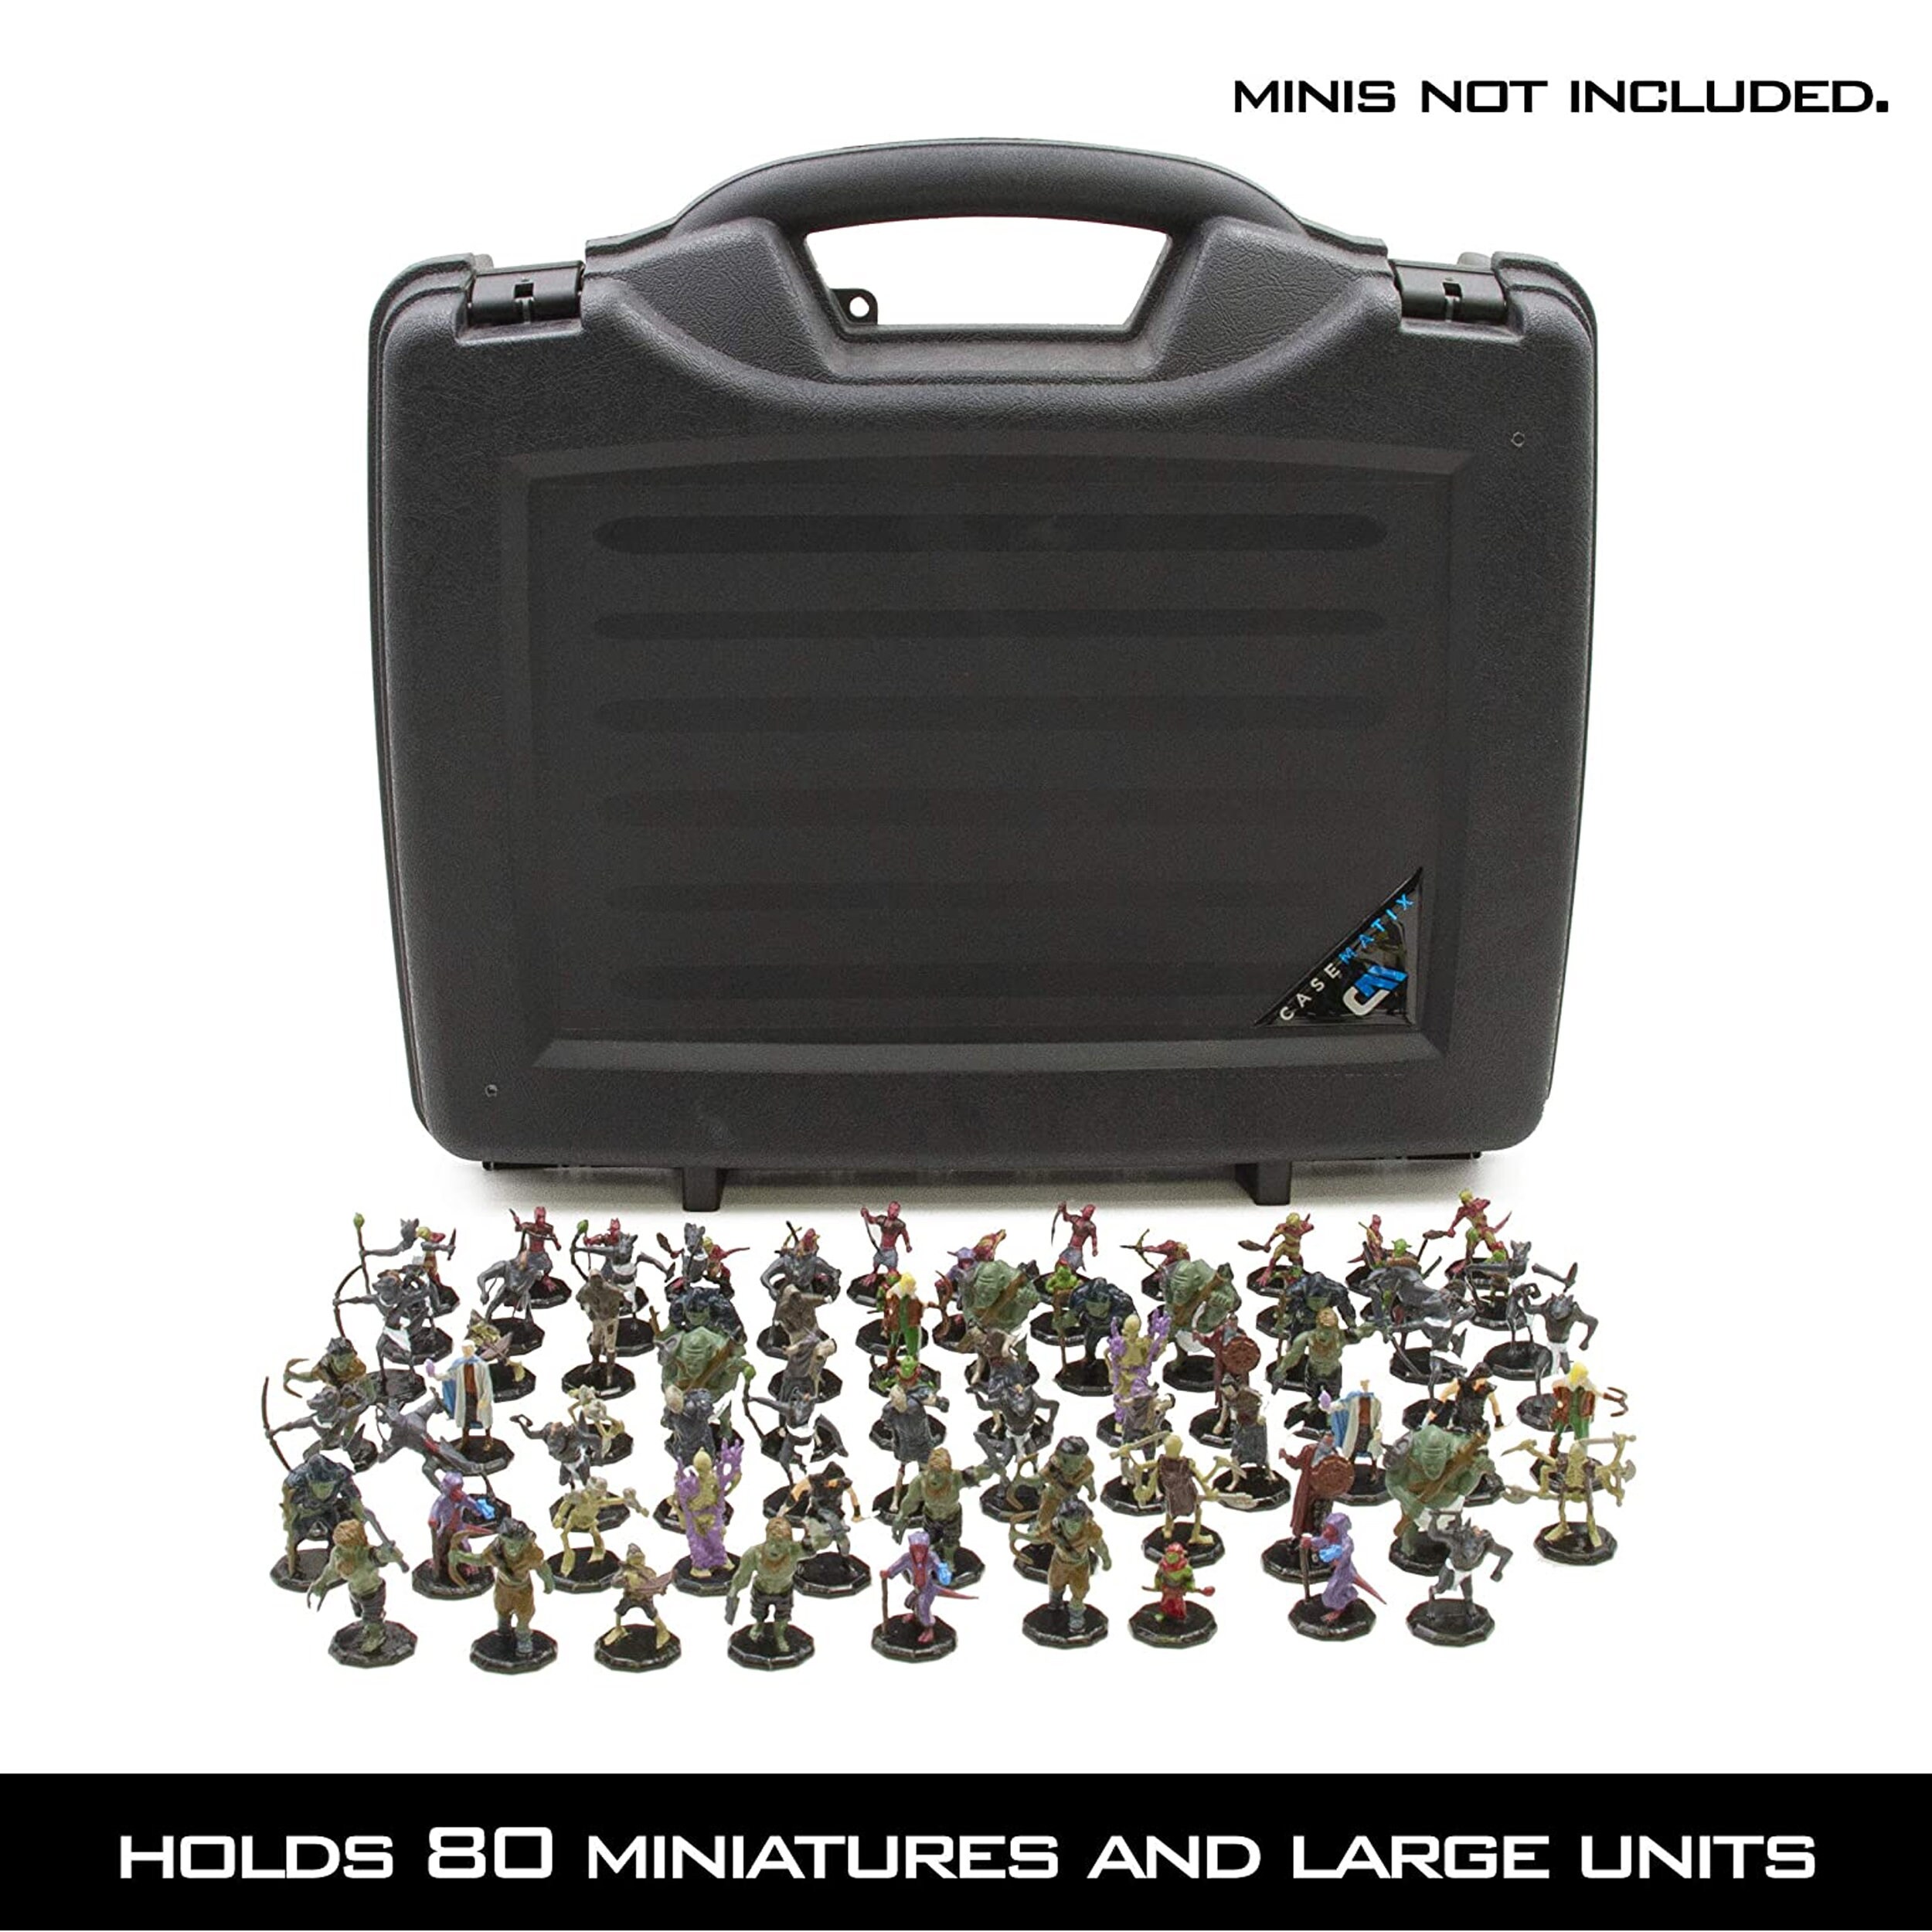 CASEMATIX Miniature Storage Hard Shell Case - 30 Slot Figurine Carrying  Case with Customizable Foam for for Warhammer 40k, DND and More!